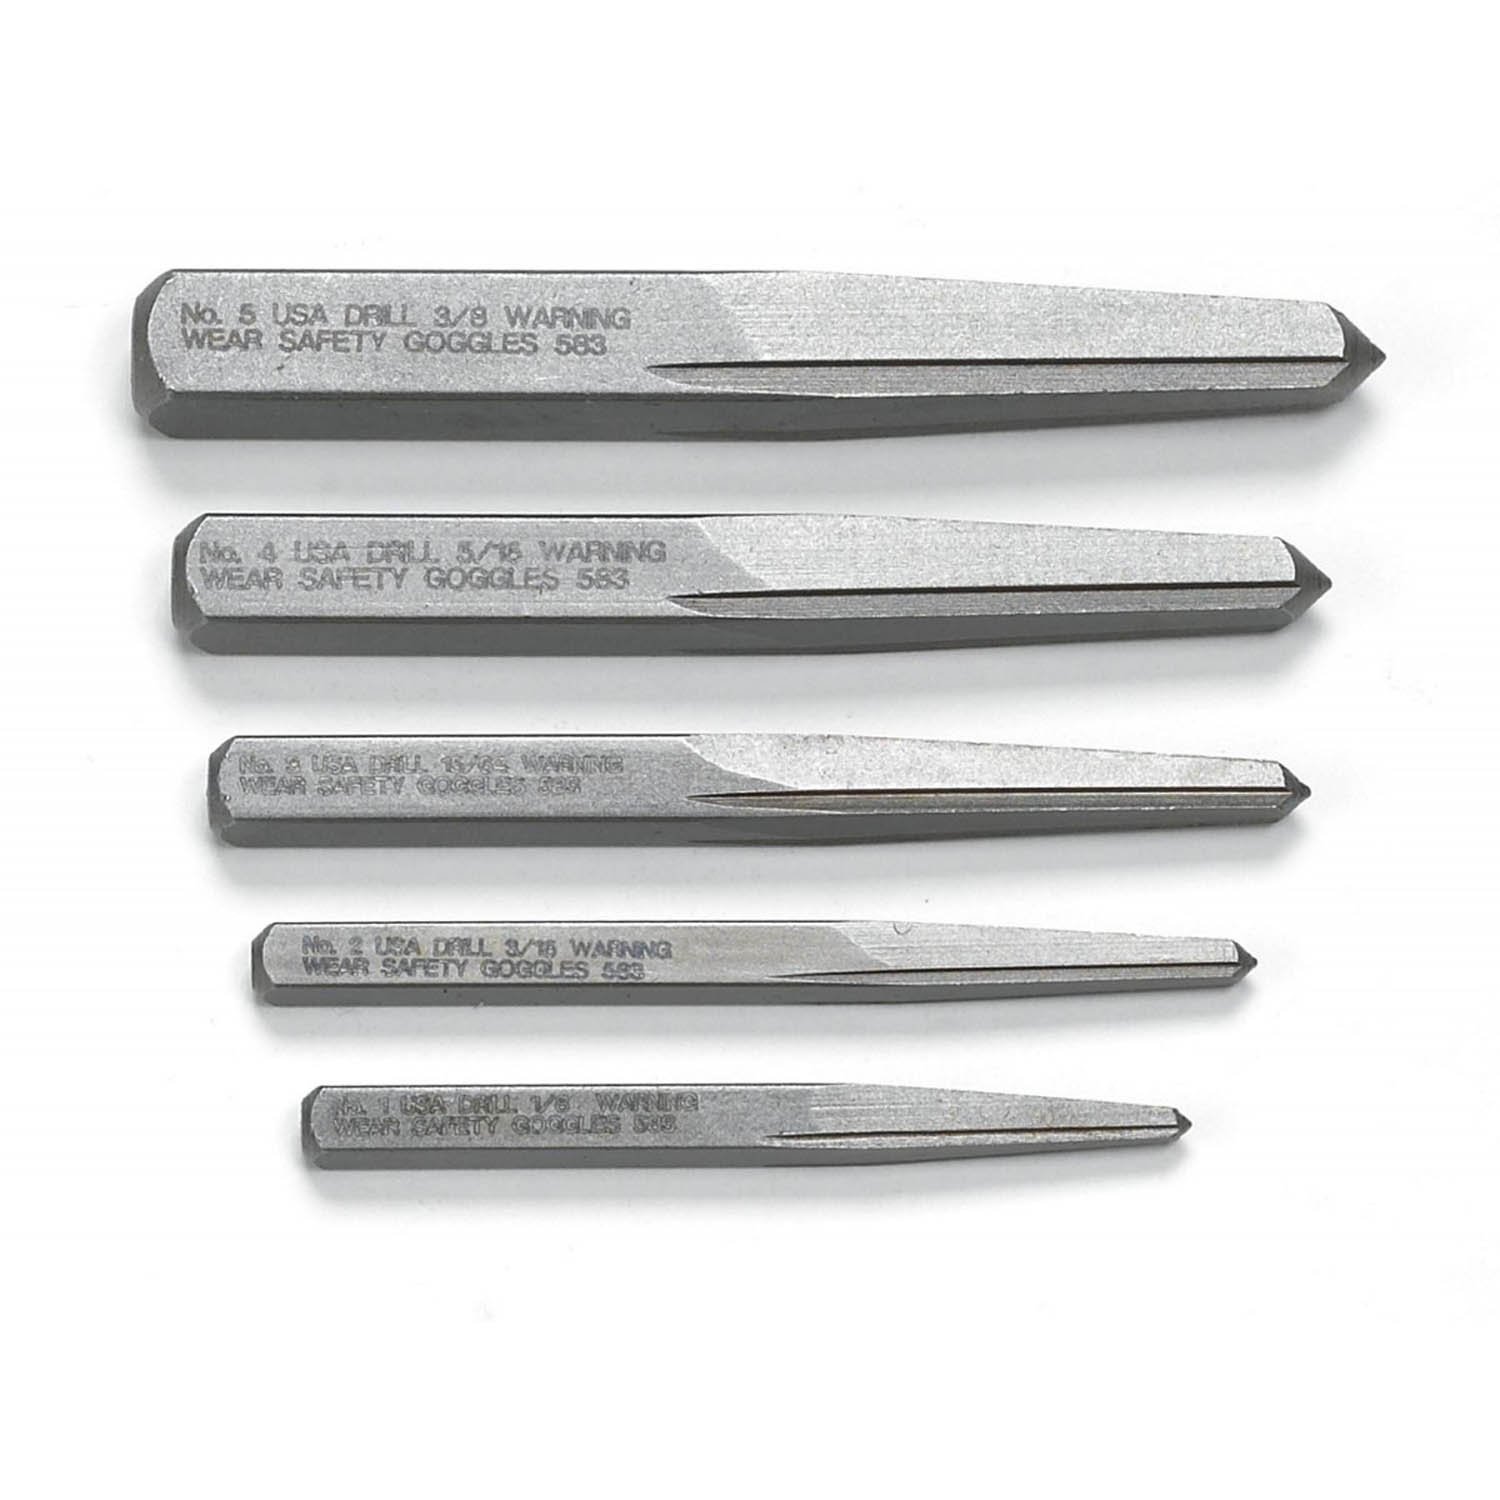 5 PC. STRAIGHT FLUTED SCREW EXTRACTOR SET 1/4 TO 5/8 IN.